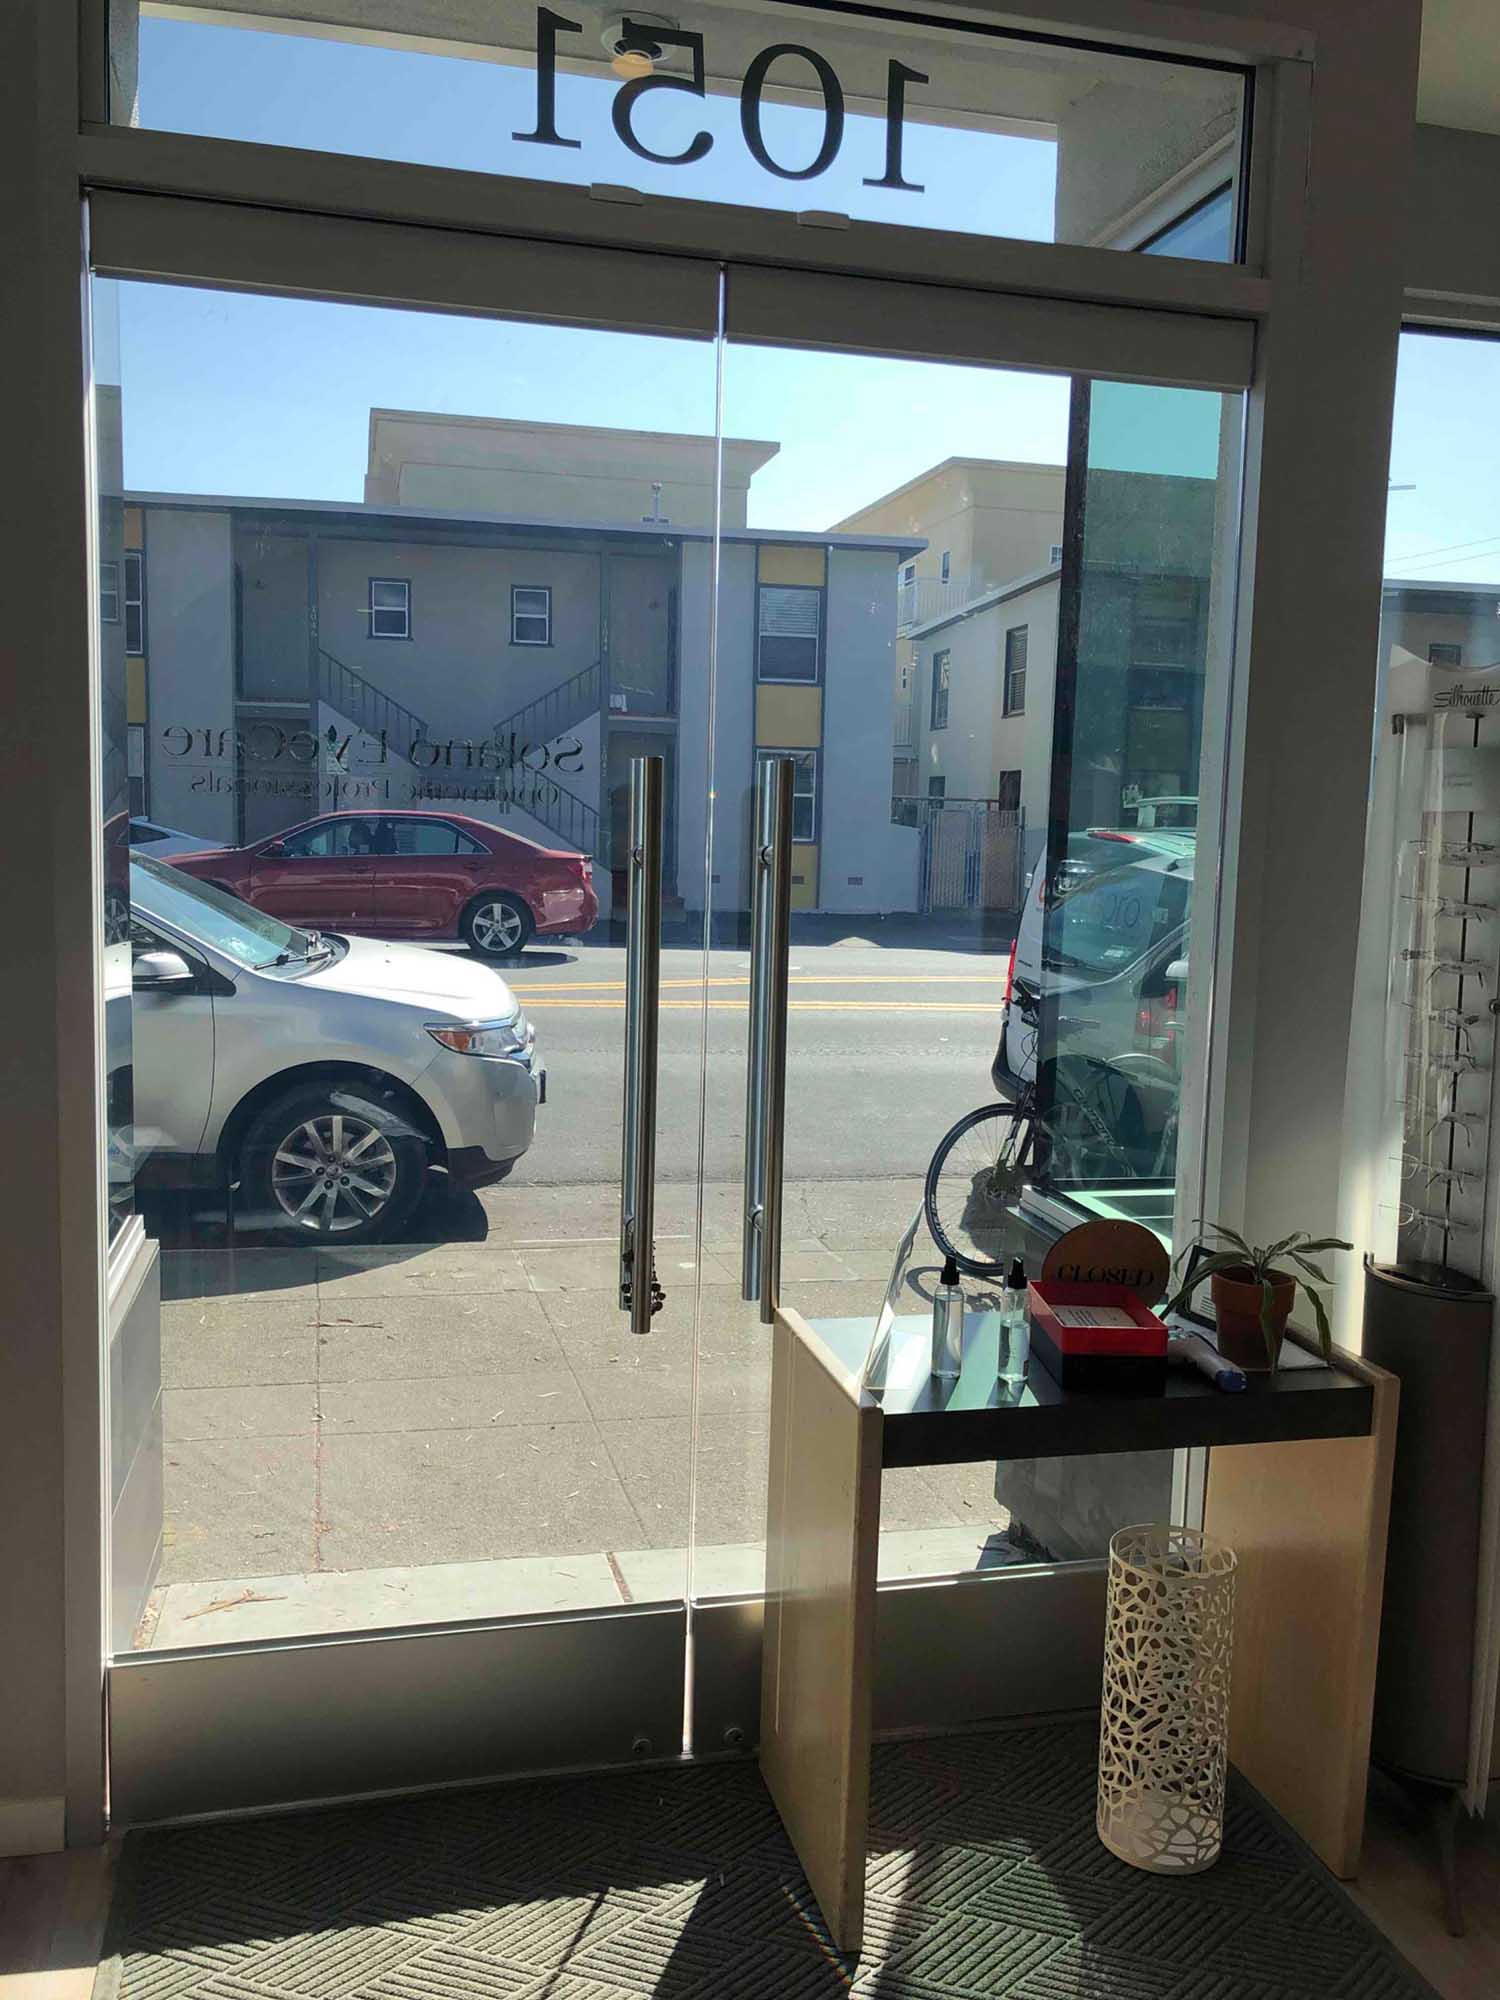 Add 3M Window Film to your Solano, Ave shop with ClimatePro. Get a free estimate in the San Francisco Bay Area.